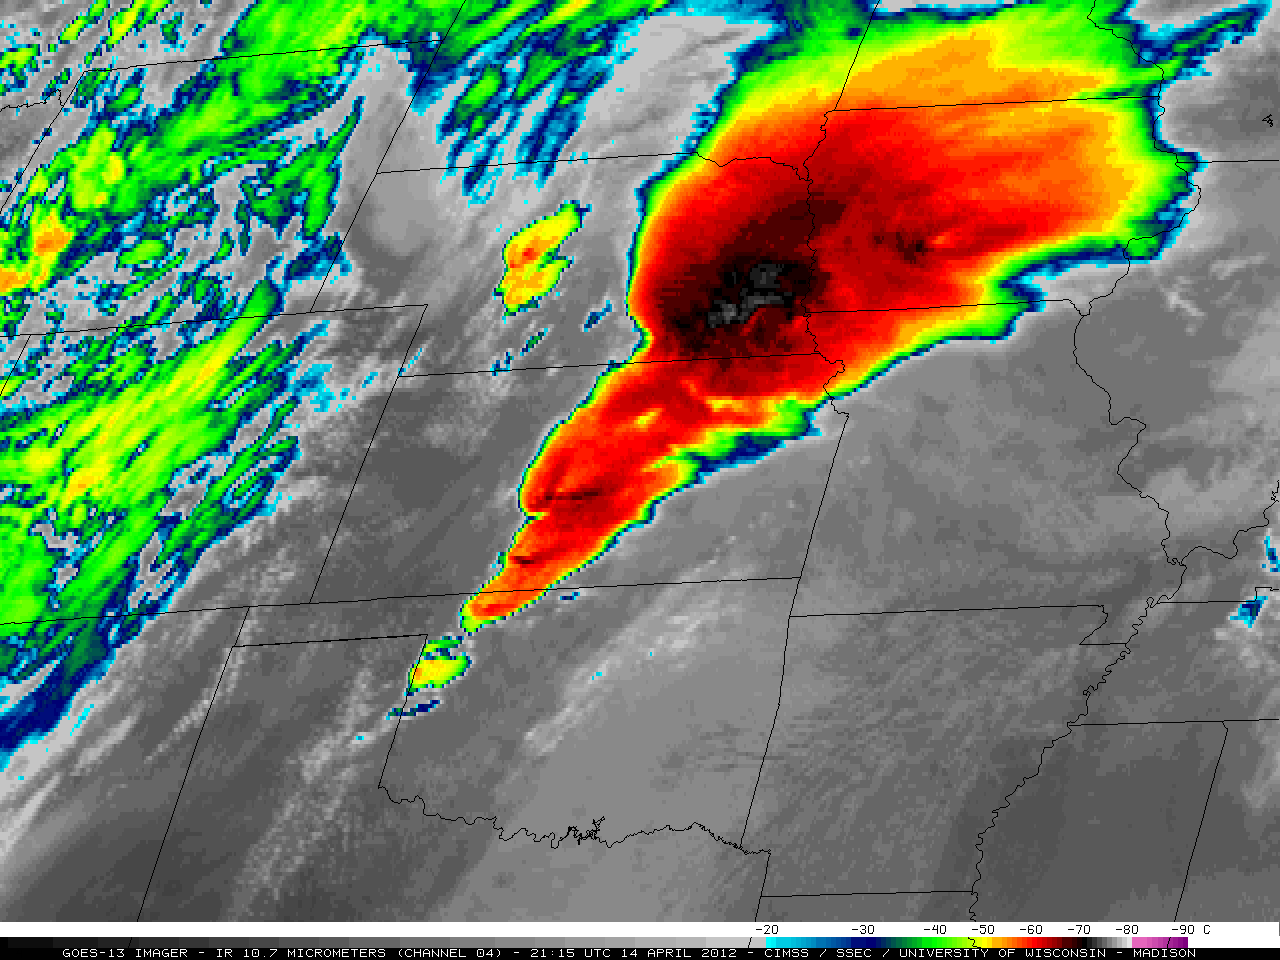 GOES-13 10.7 Âµm IR channel images (click image to play animation)